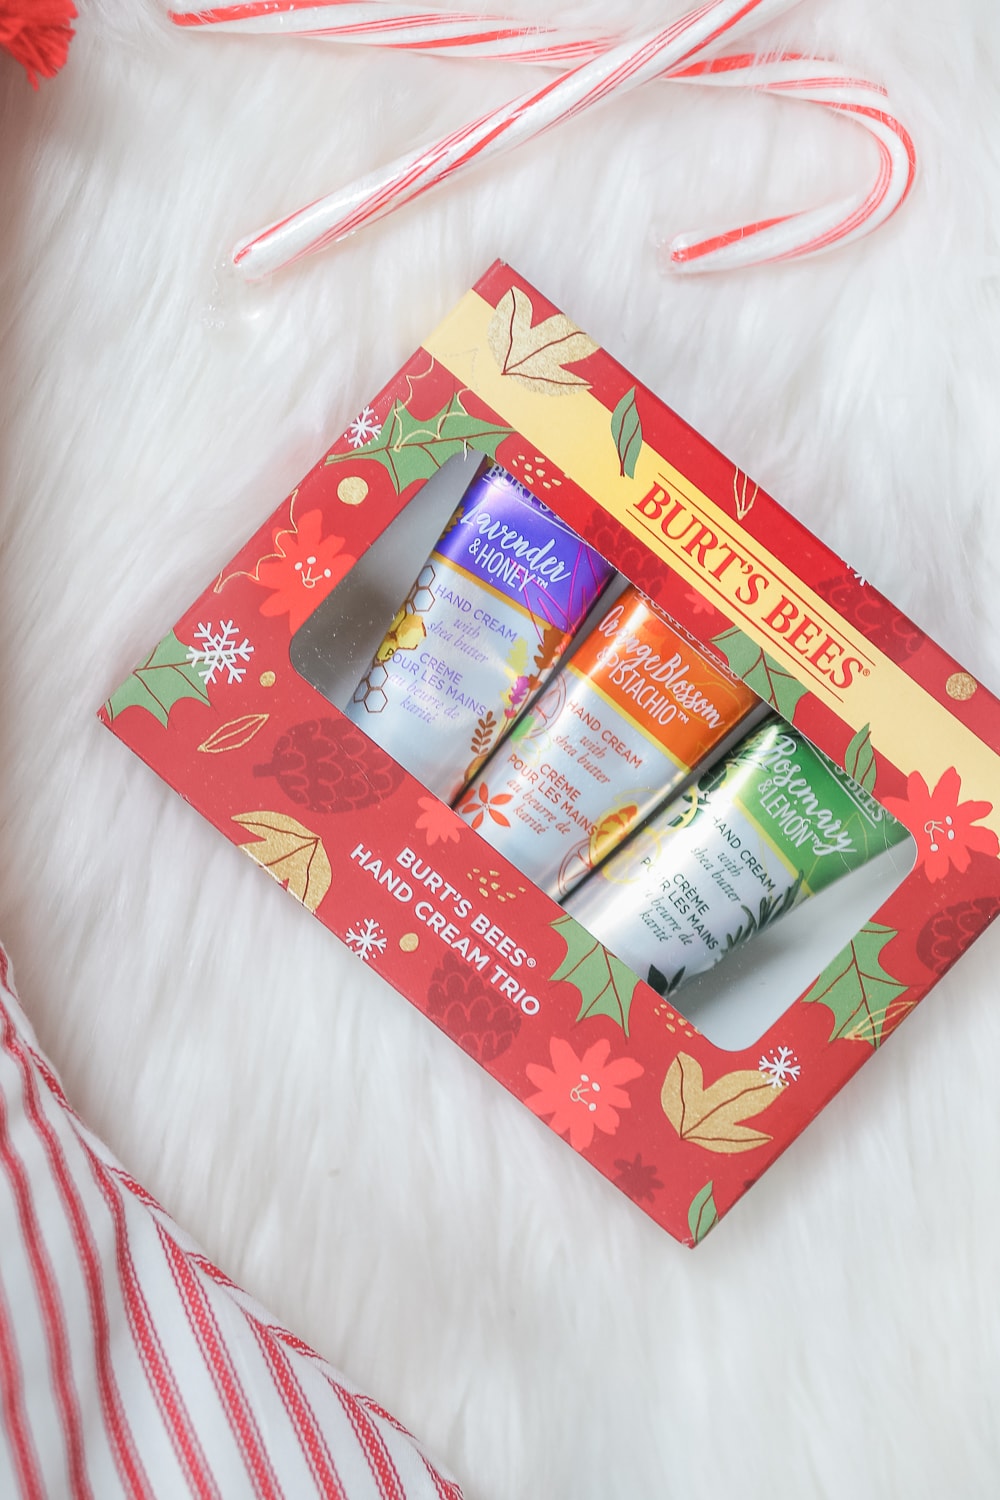 Burt's Bees Hand Cream Gift Set featured by blogger Stephanie Ziajka in her roundup of the best stocking stuffers for mom under 15 on Diary of a Debutante